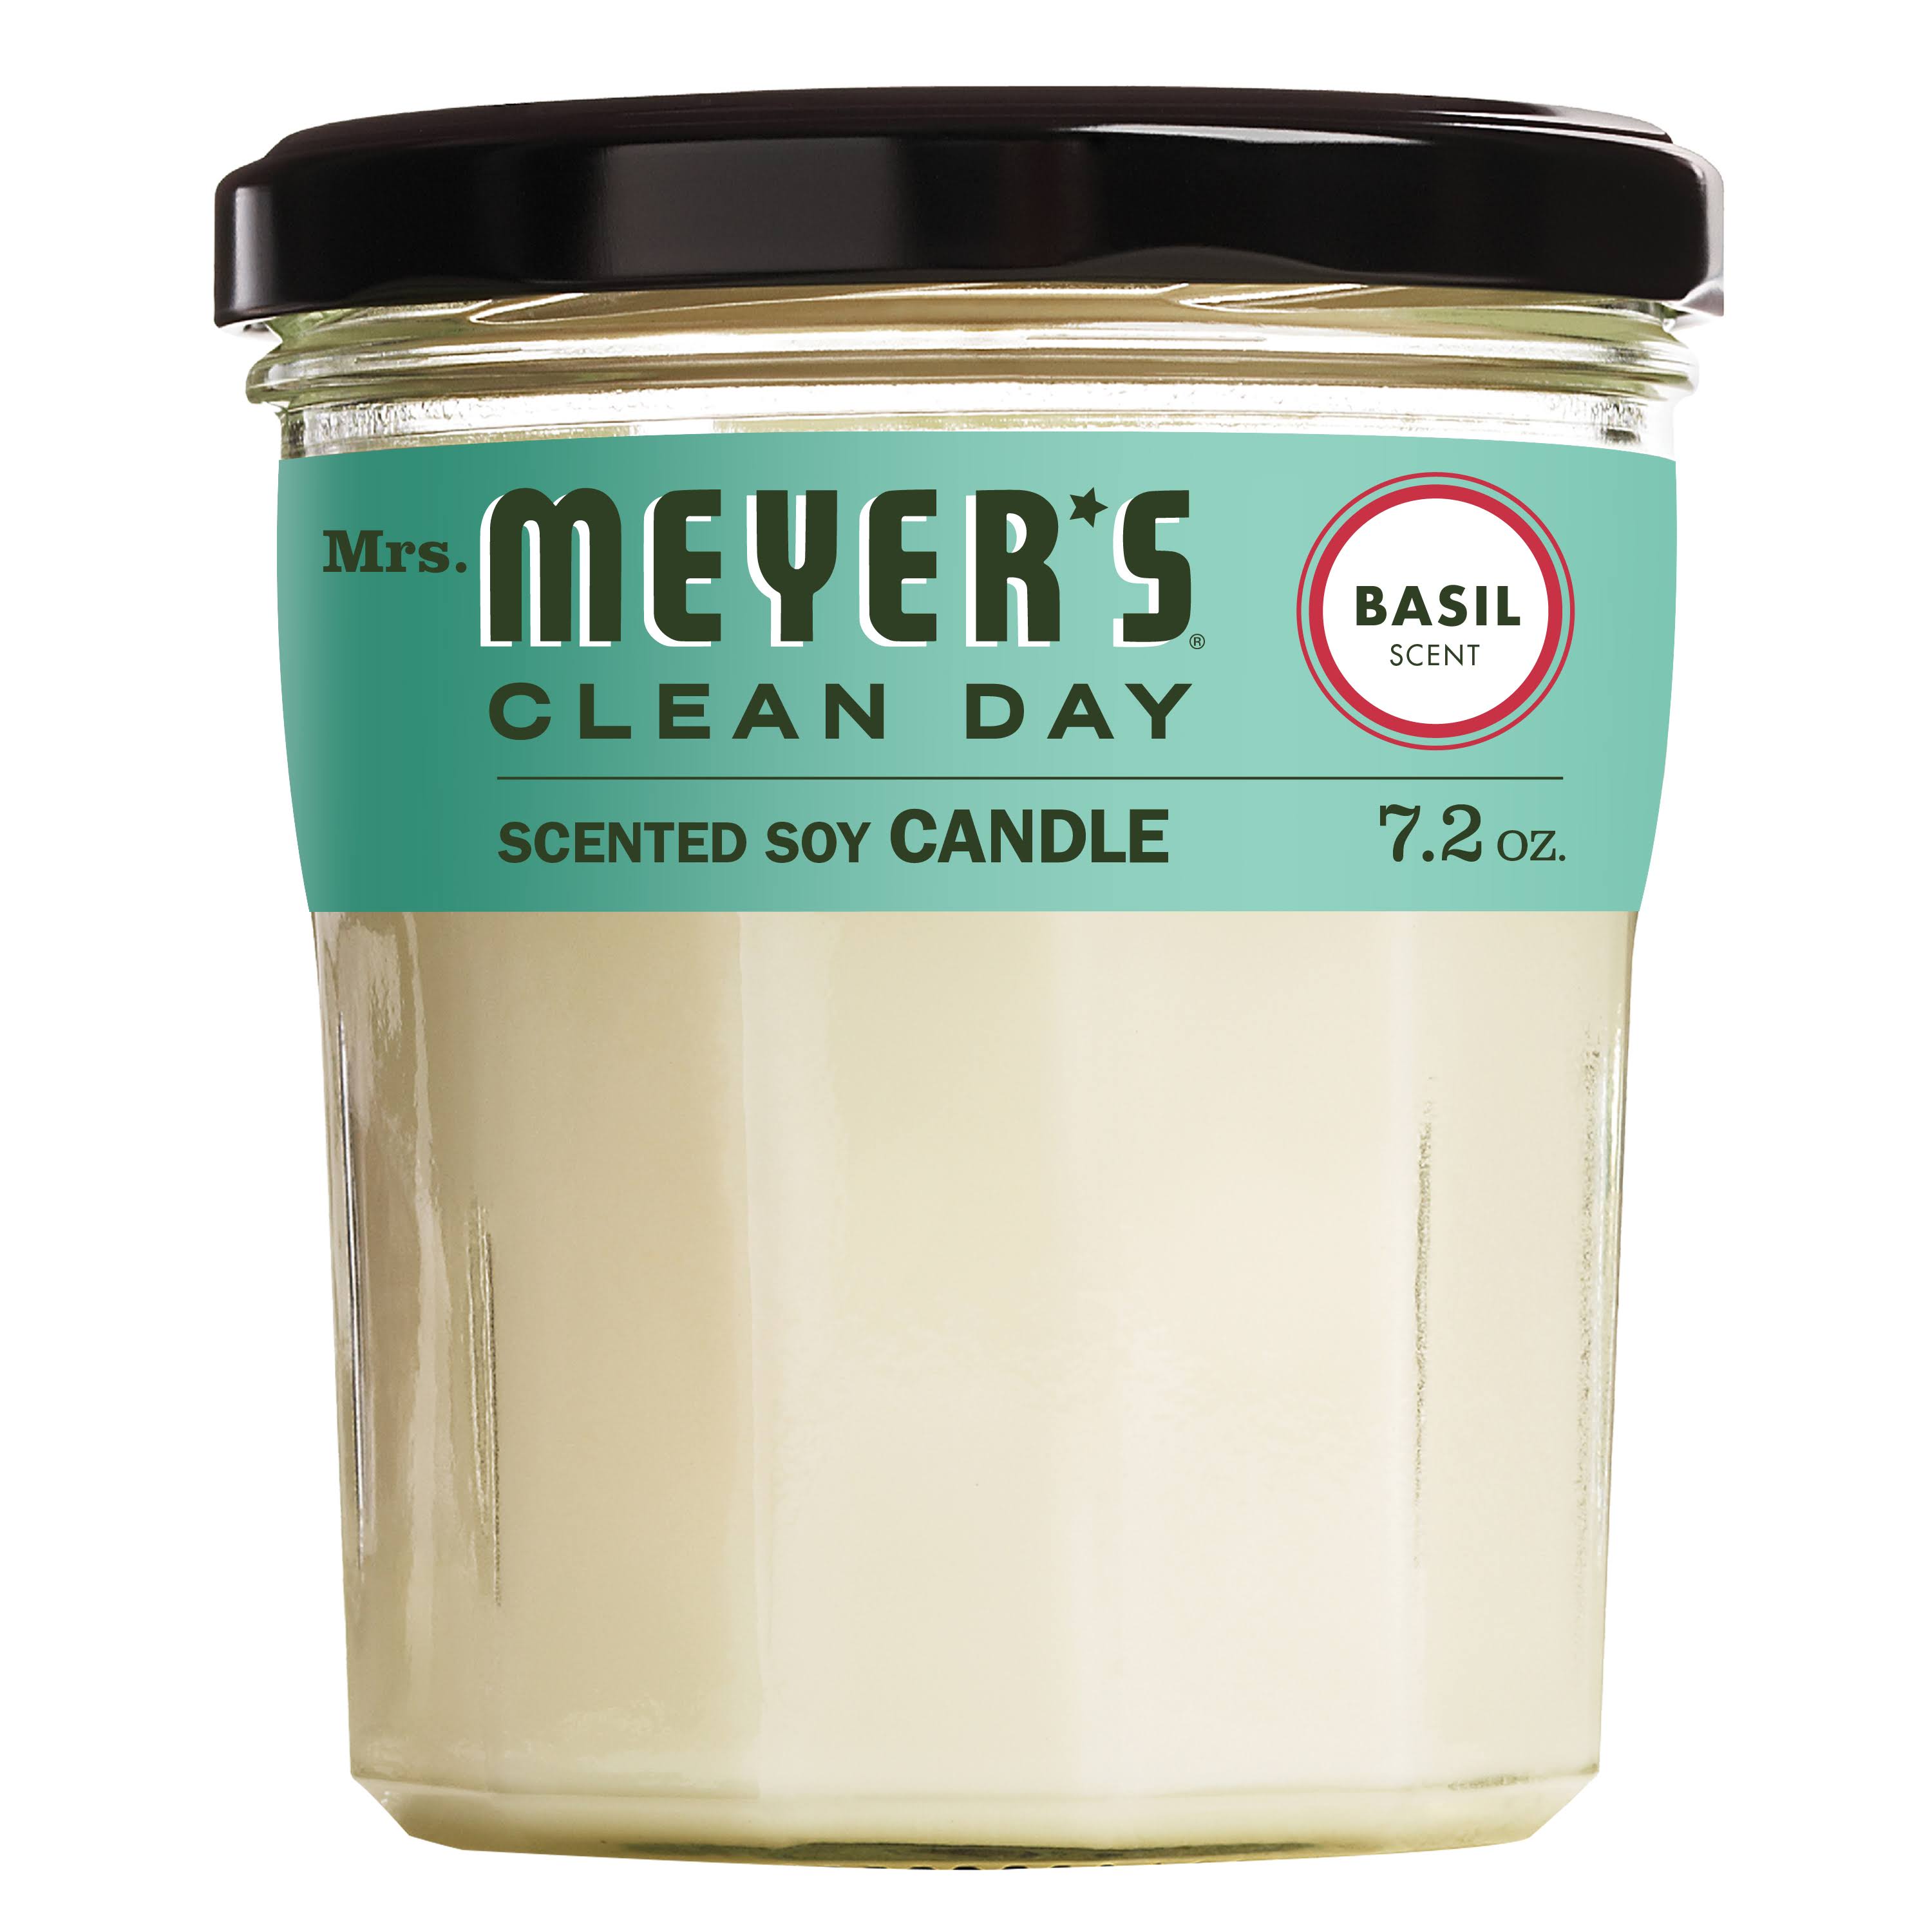 Mrs. Meyer's Clean Day Soy Candle - Scented Basil Jar, 210ml